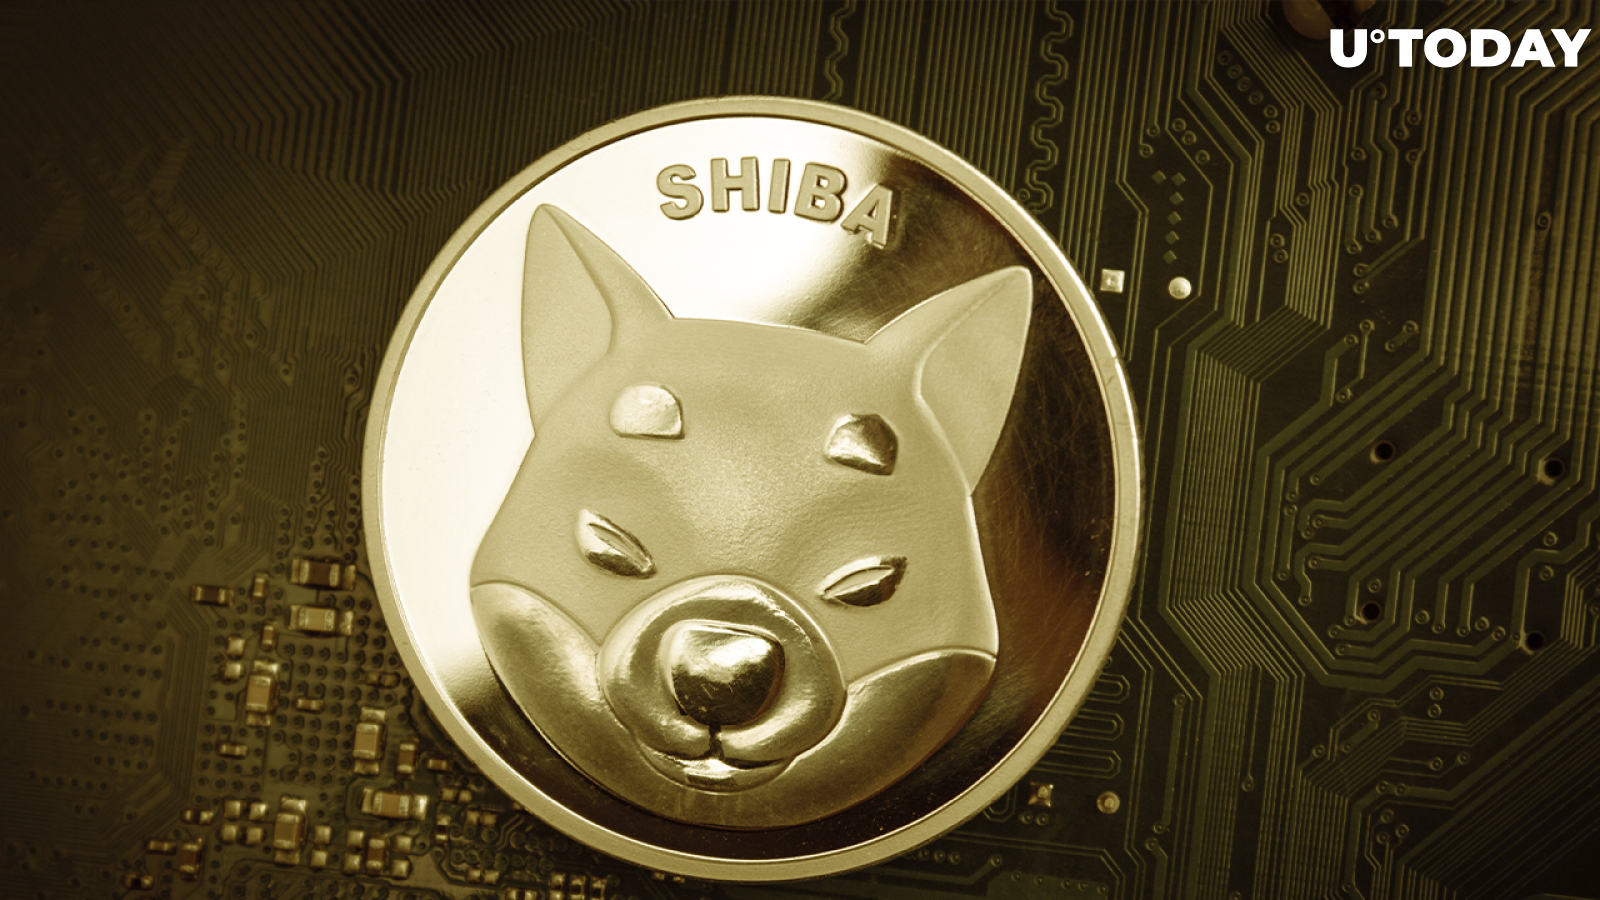 Shiba Inu Becomes One of Most-Purchased Tokens by Ethereum Whales, as On-Chain Data Reports